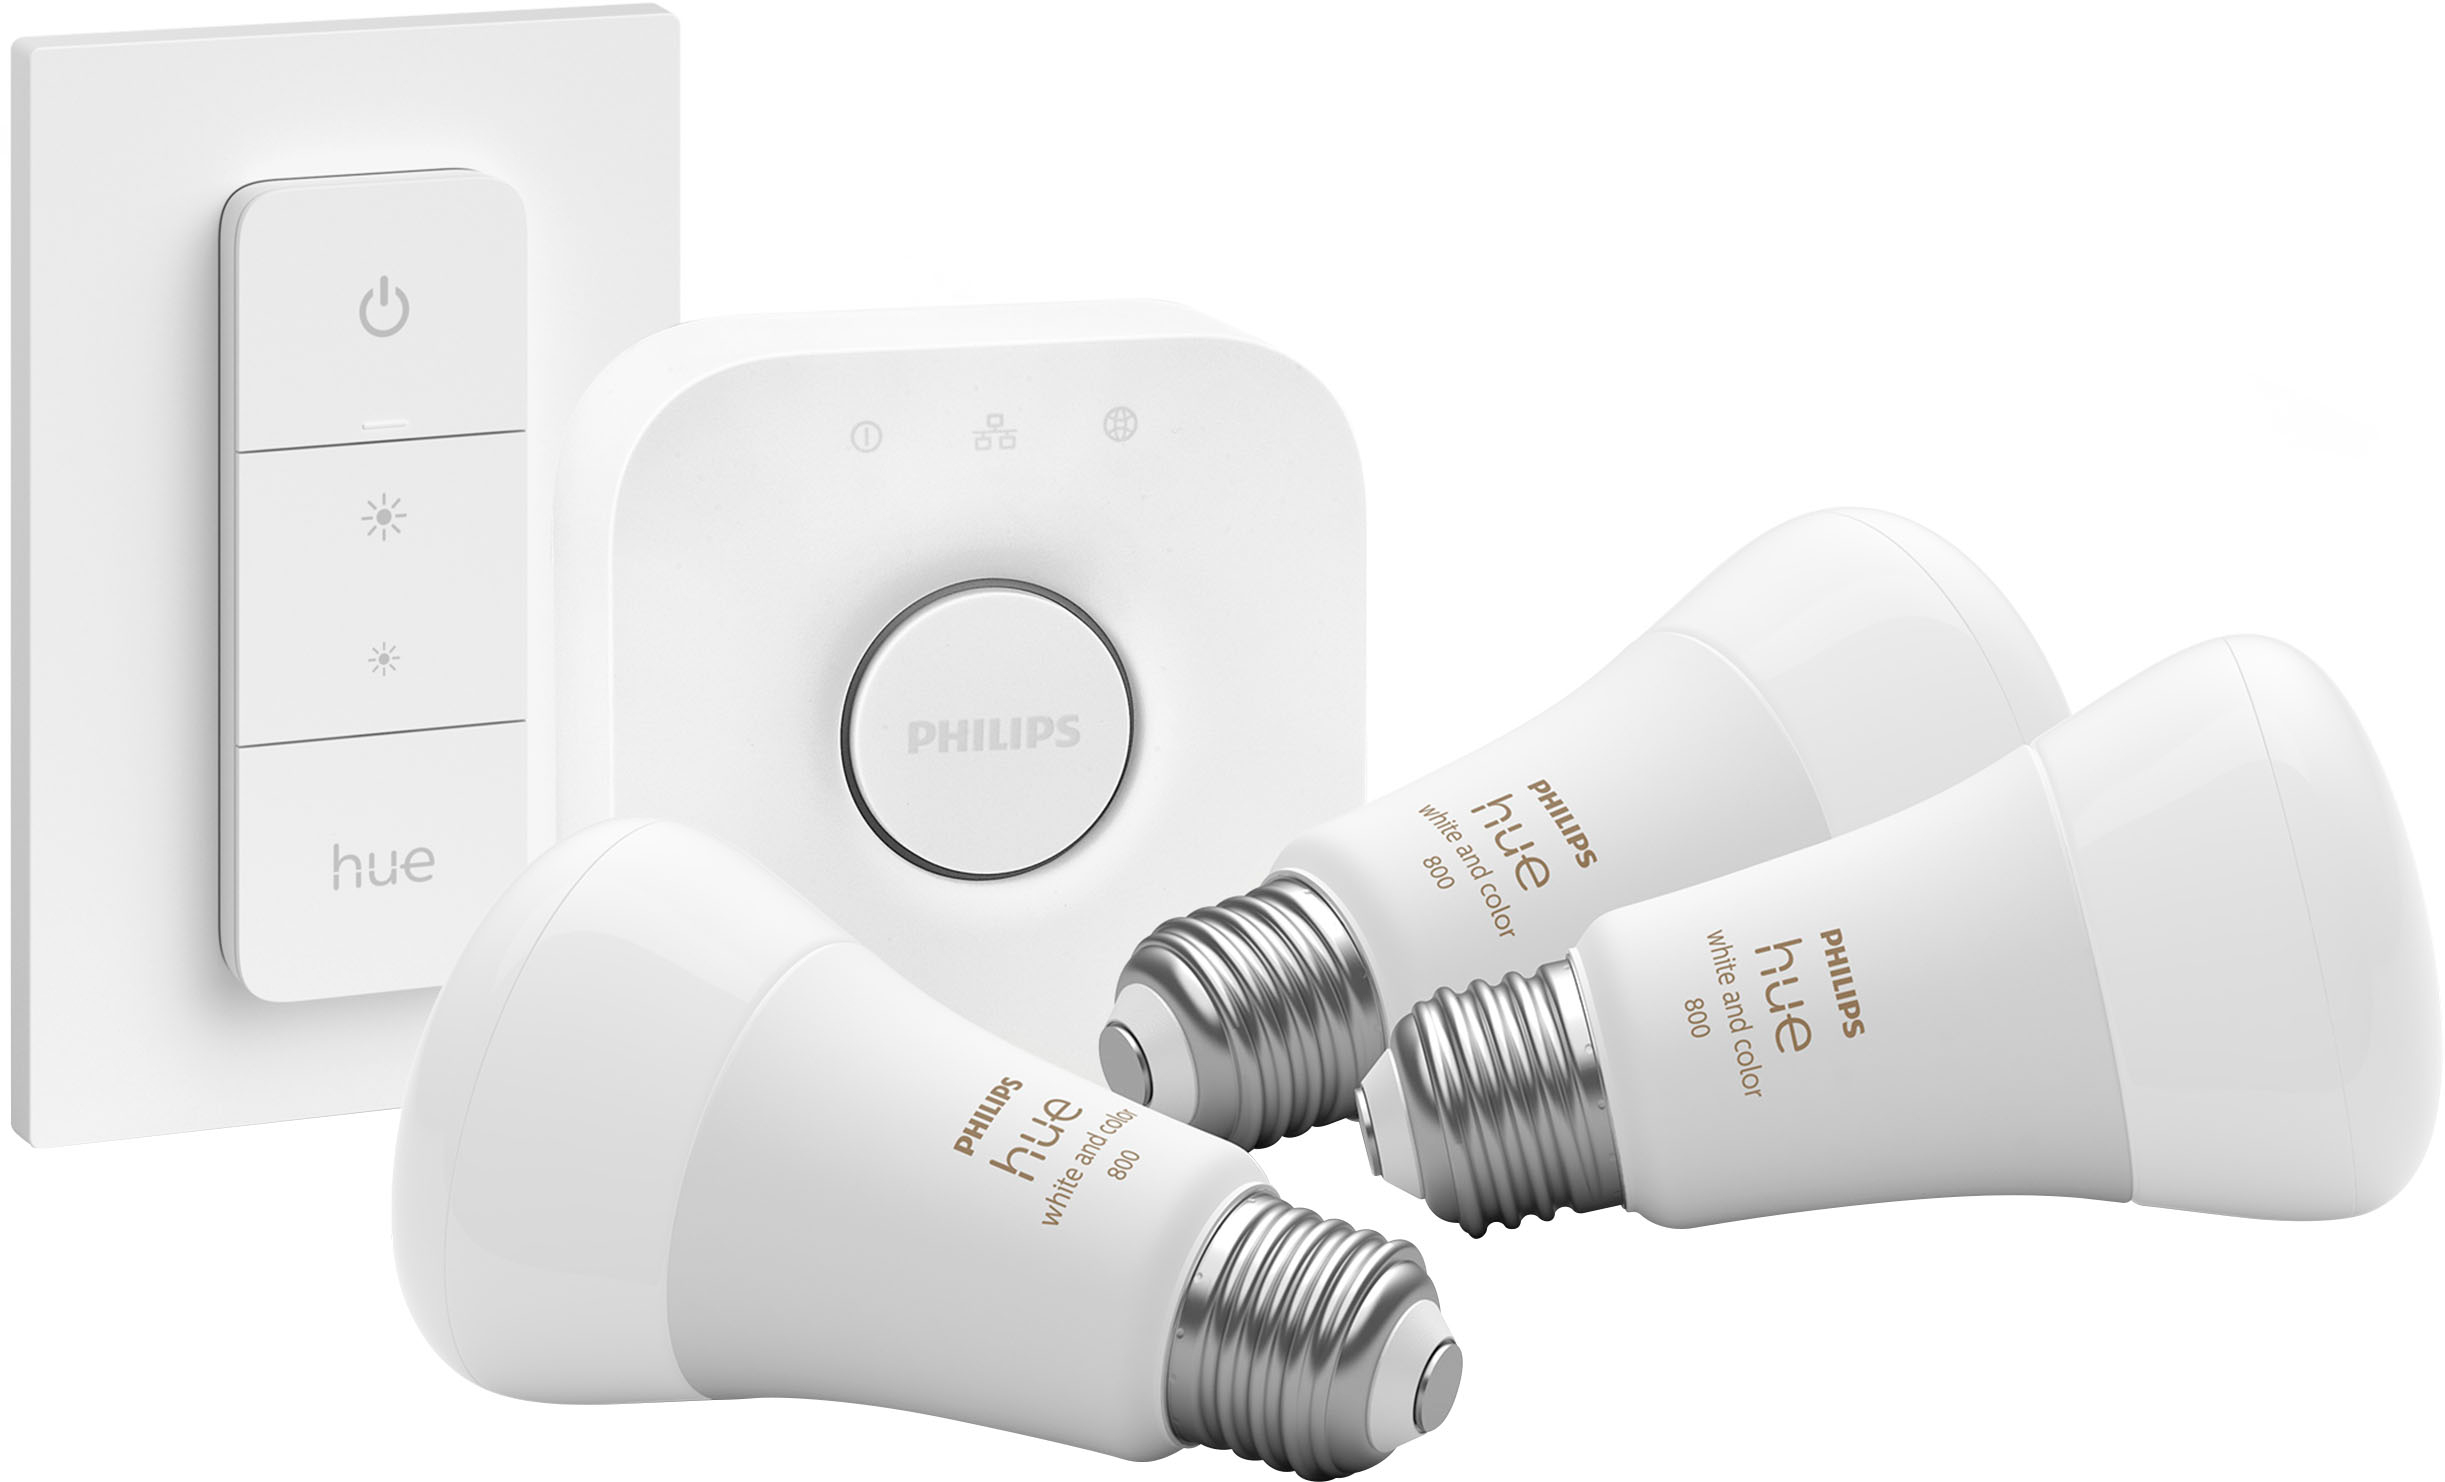 Philips Hue 75W A19 Smart LED Starter Kit White and Color Ambiance